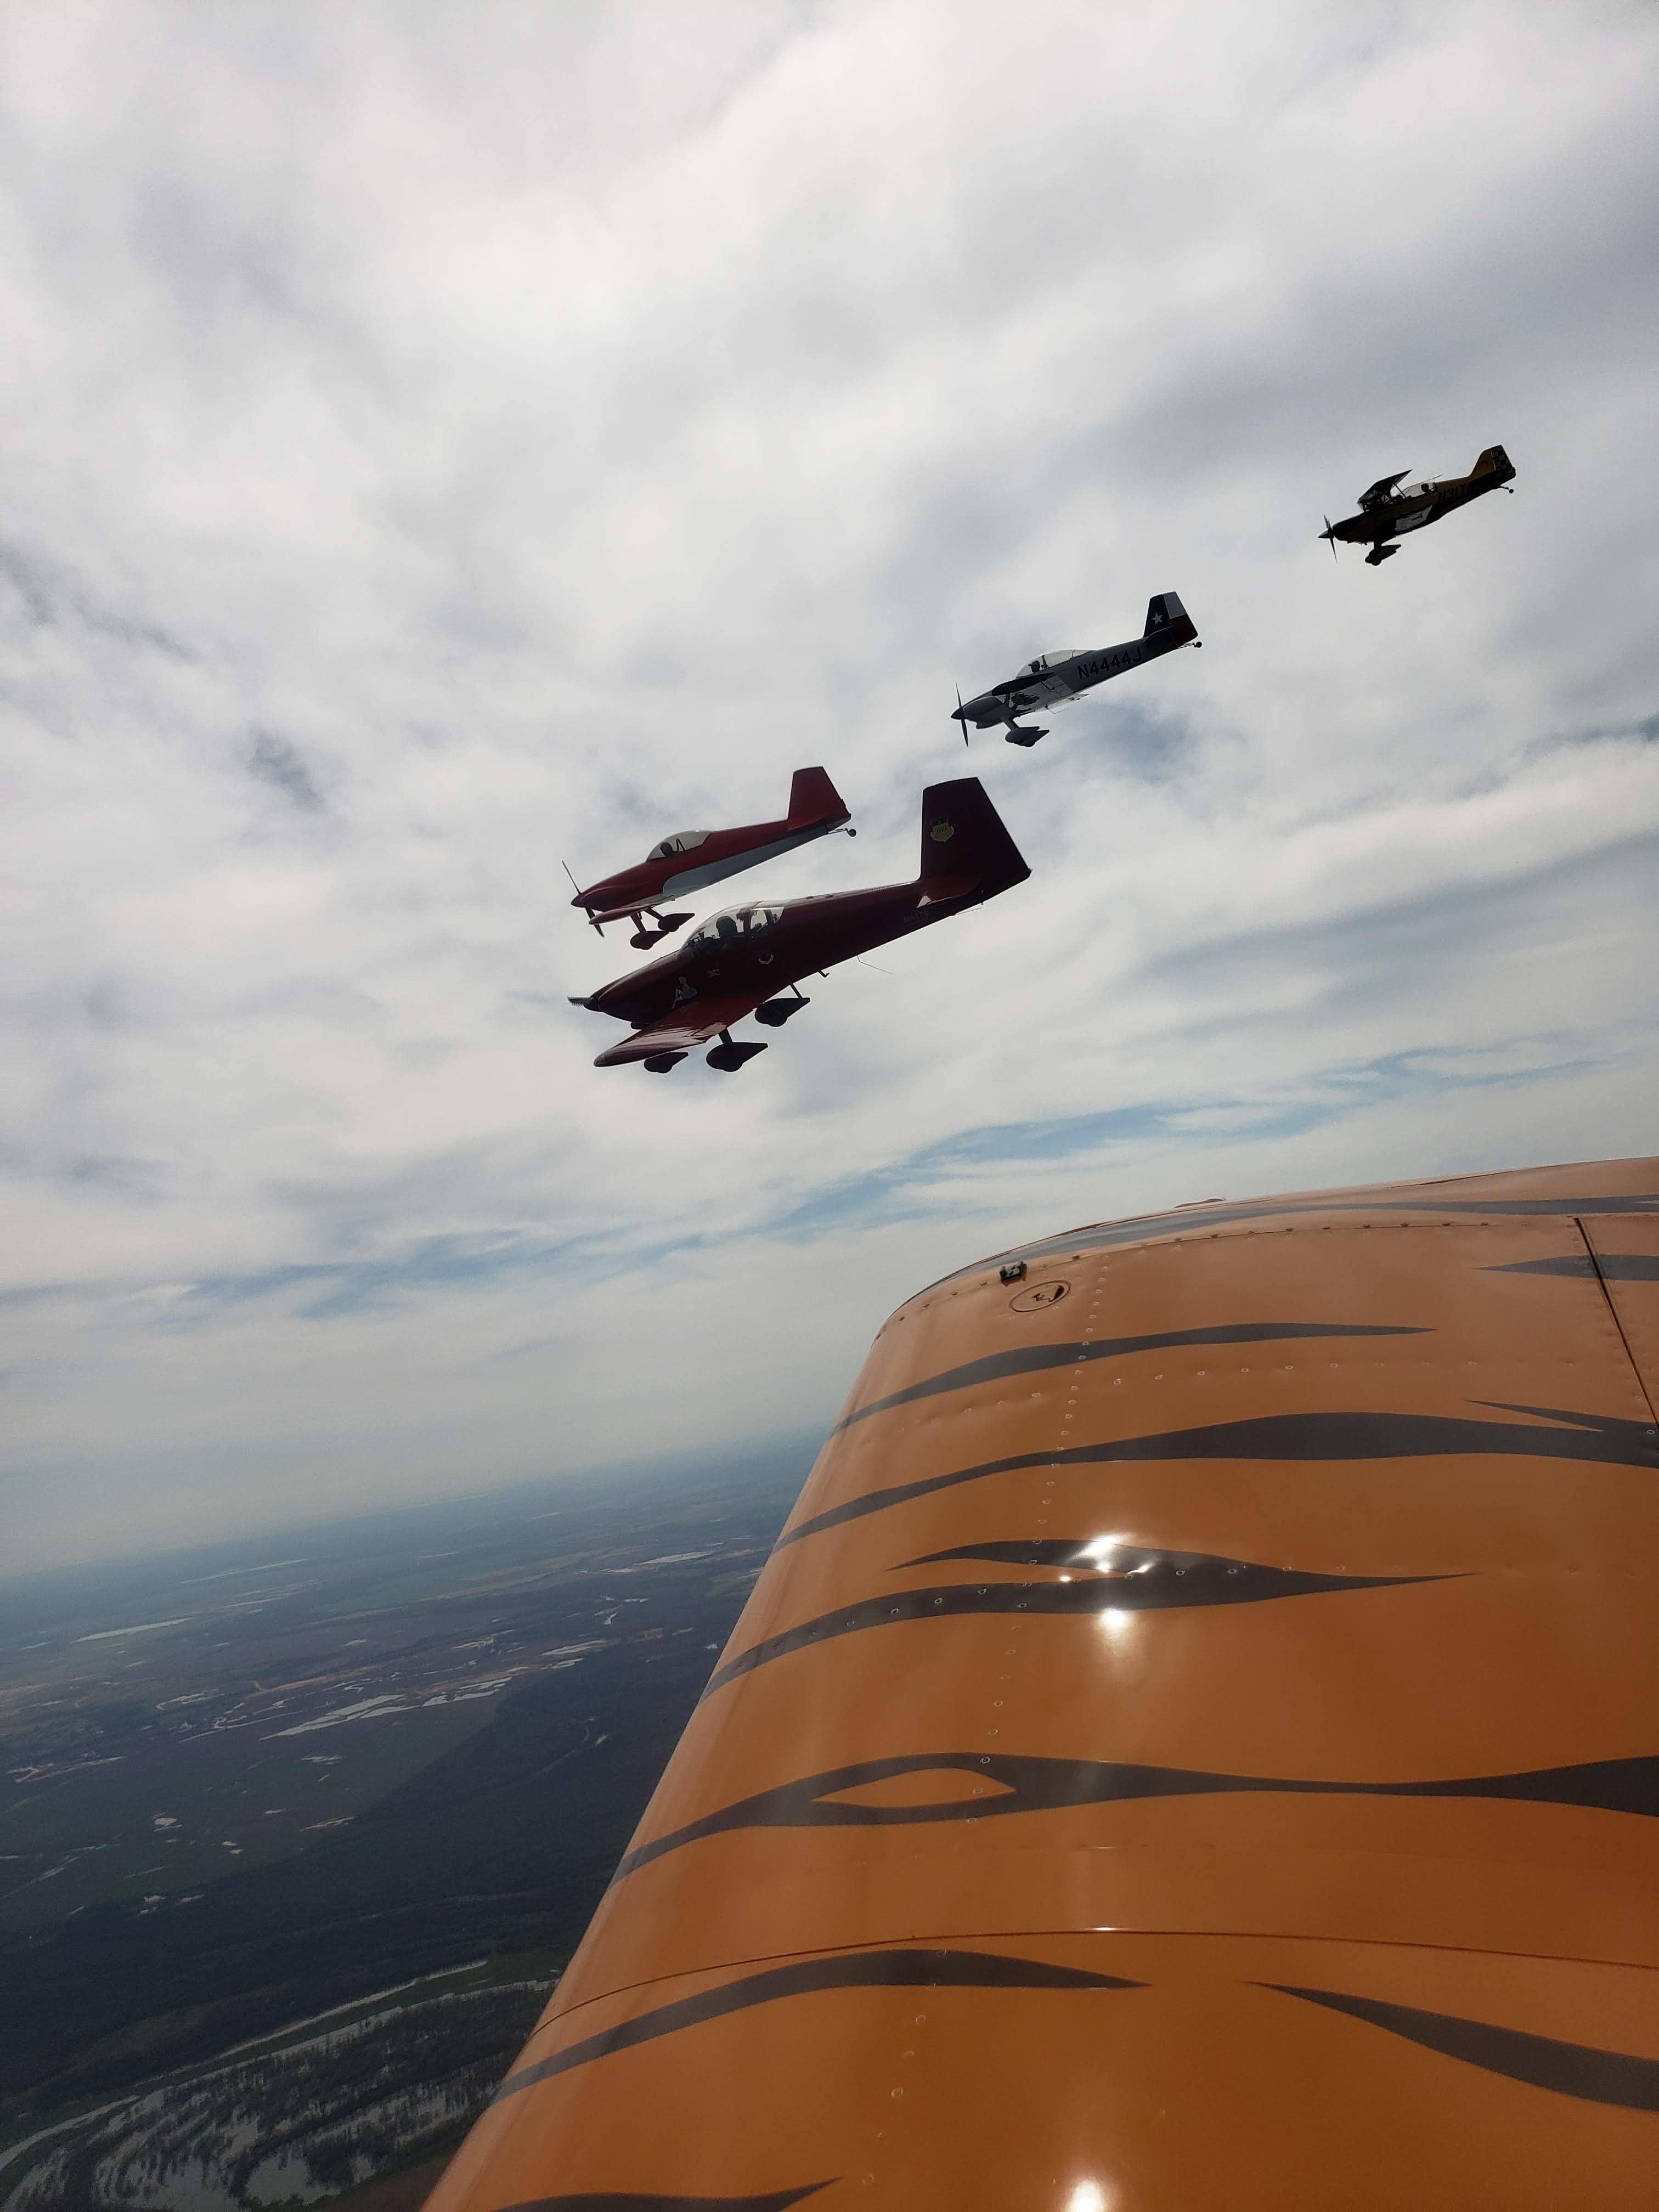 The View from Bloke's T-18 During Formation Maneuvering